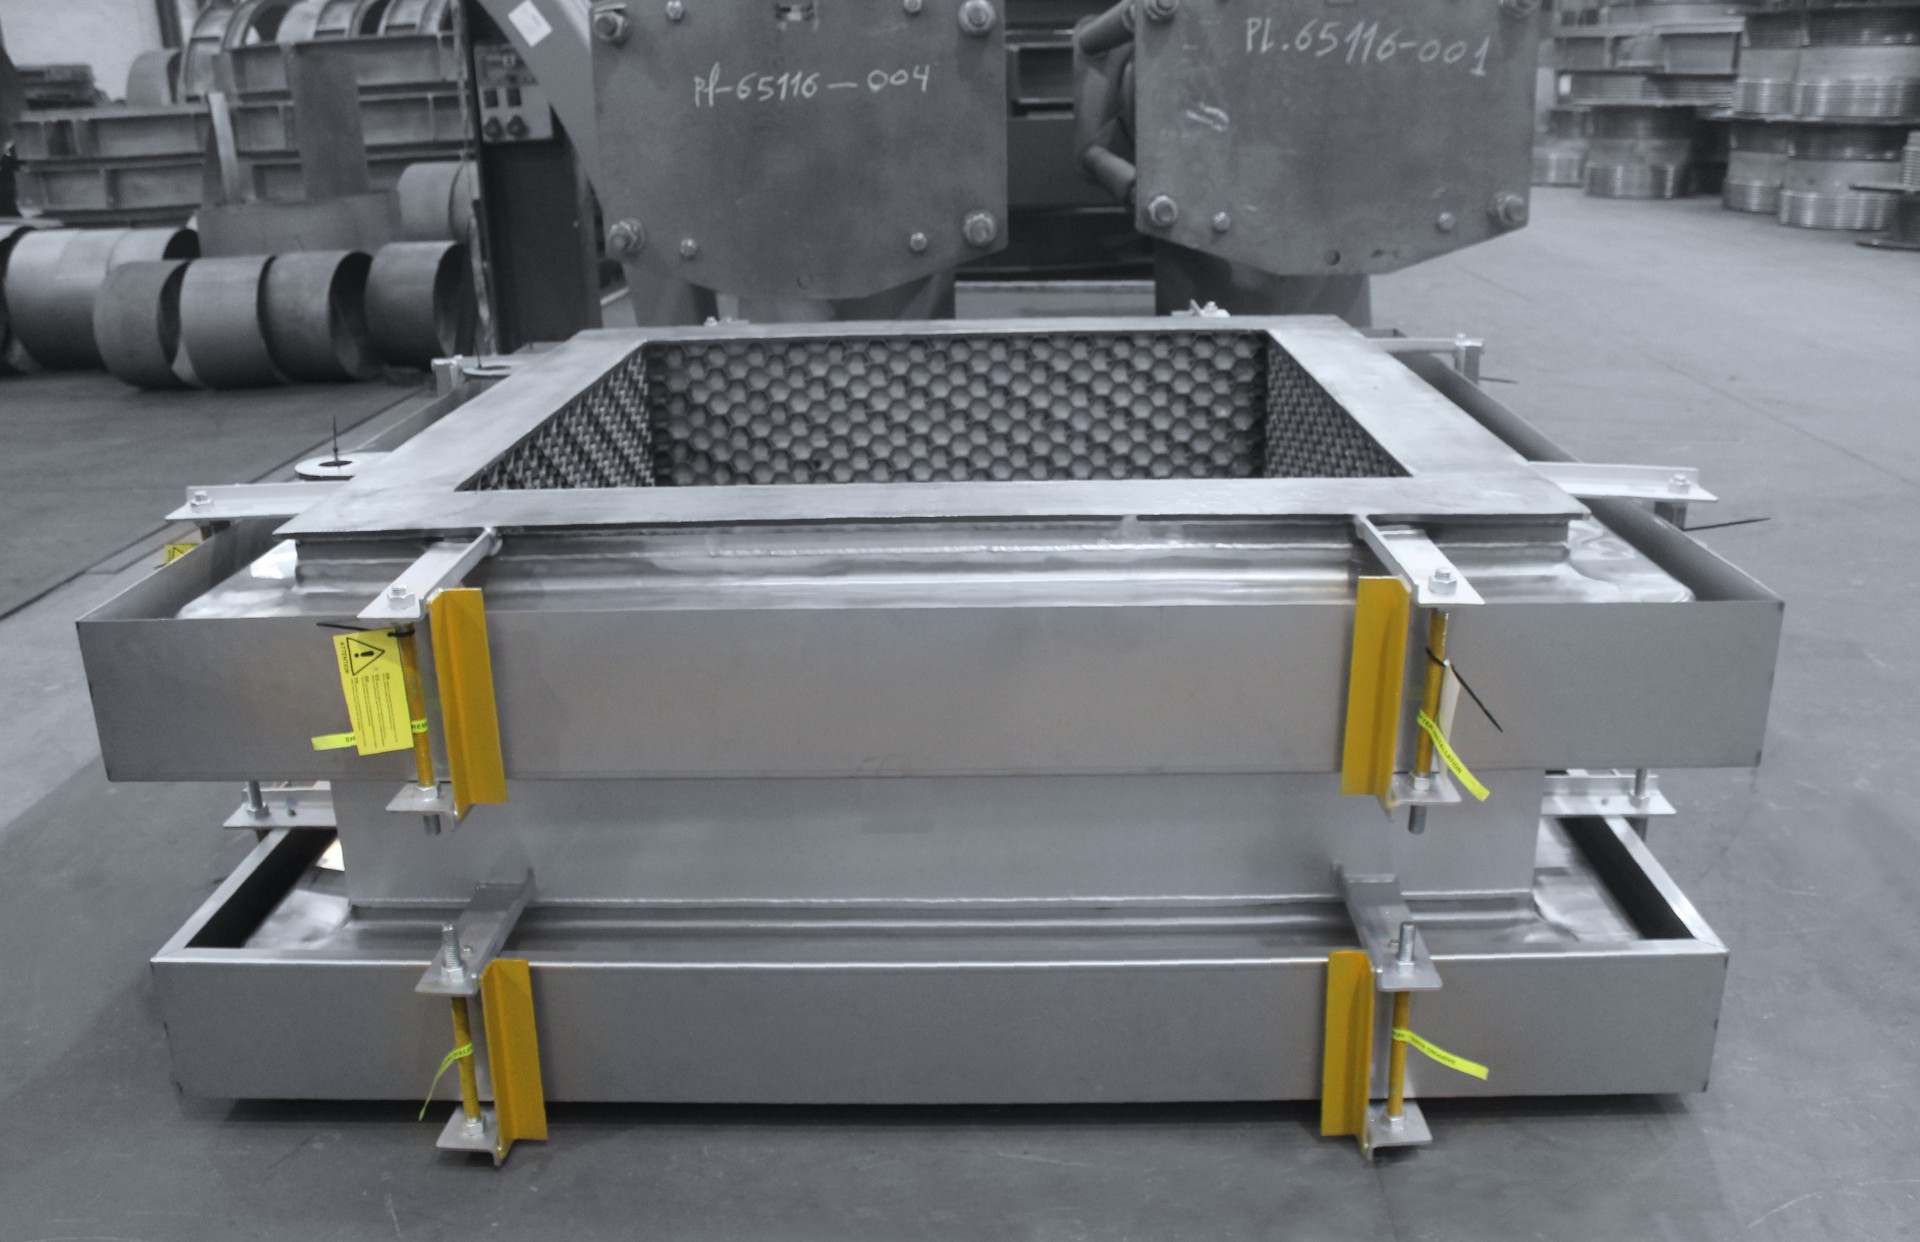 Rectangular MACOGA MRU Expansion Joints for ESSO Refinery